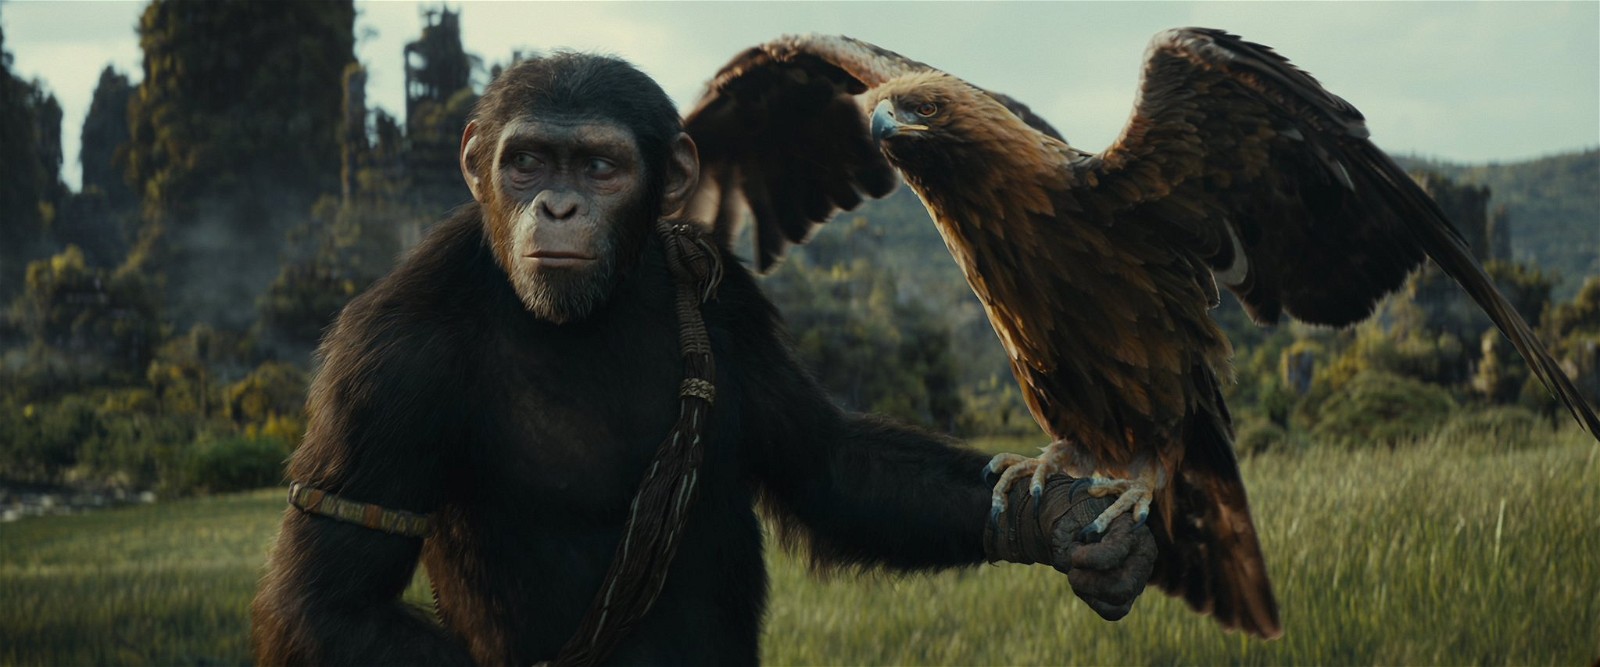 Andy Serkis acted as a mentor for the new cast members in Kingdom of the Planet of the Apes